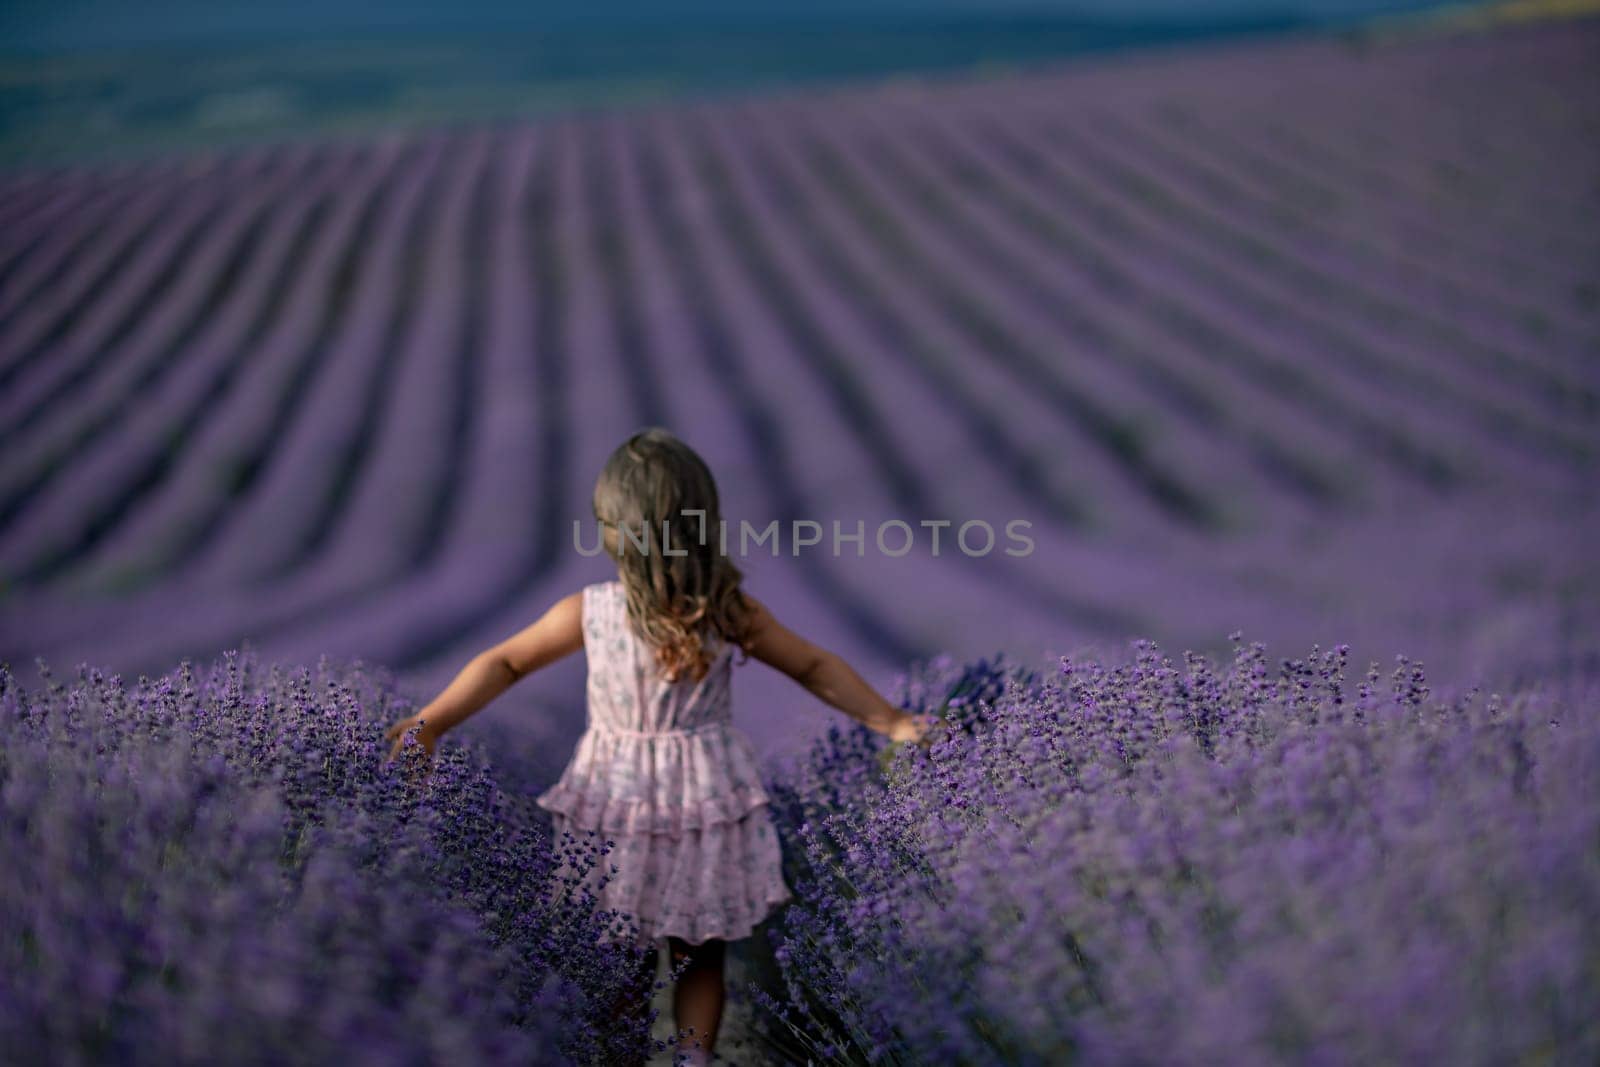 Lavender field girl. Back view happy girl in pink dress with flowing hair runs through a lilac field of lavender. Aromatherapy travel.